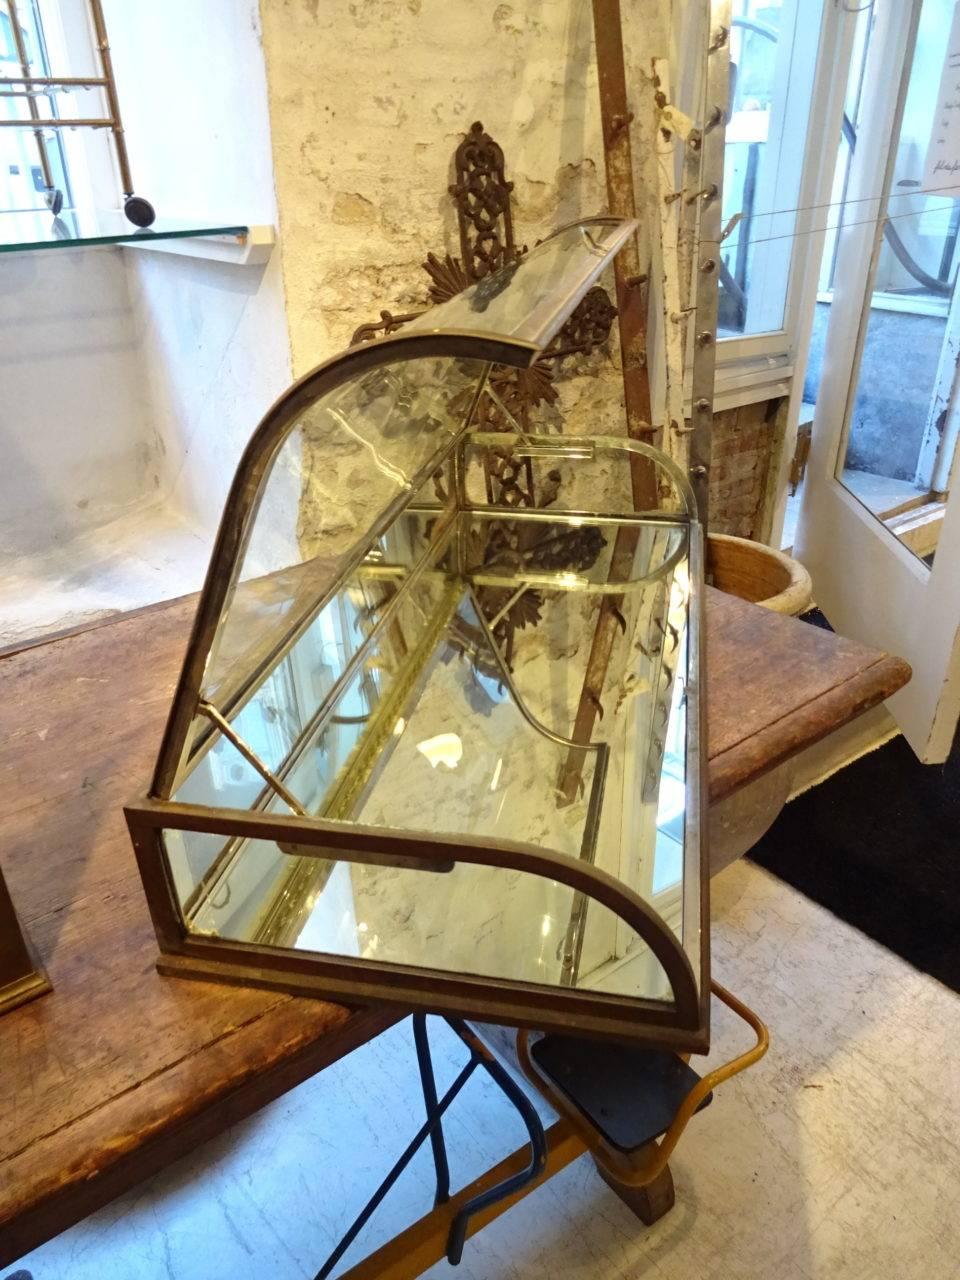 Vintage jewellery display case from a French jewellery boutique. Made of brass, with mirrored glass, this display item also has the most beautiful curved glass front.